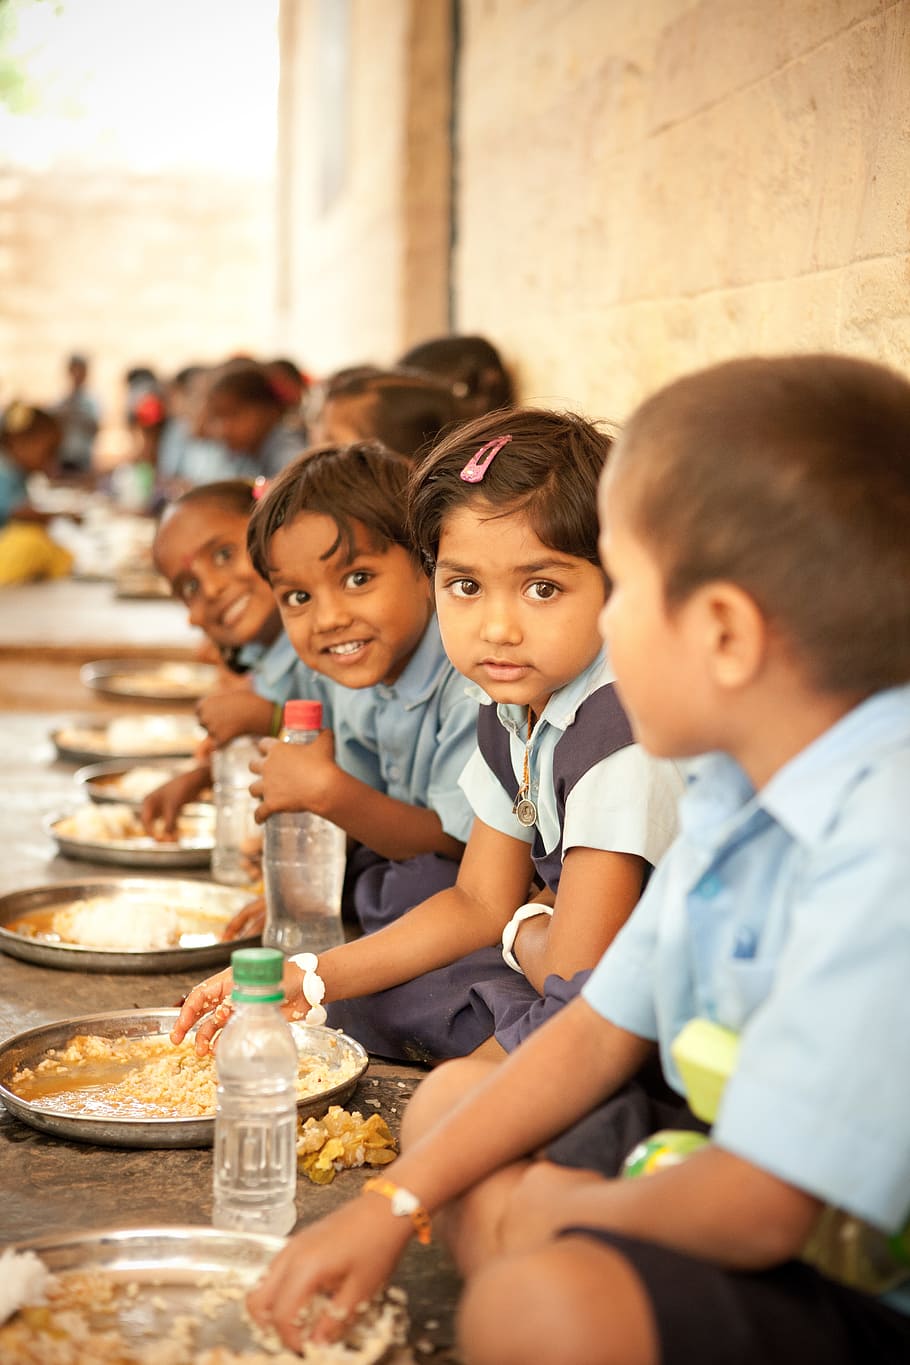 mid, day meal, Food, Hungry, Children, Mid Day Meal, food for hungry children, happy children, smile on children face, child